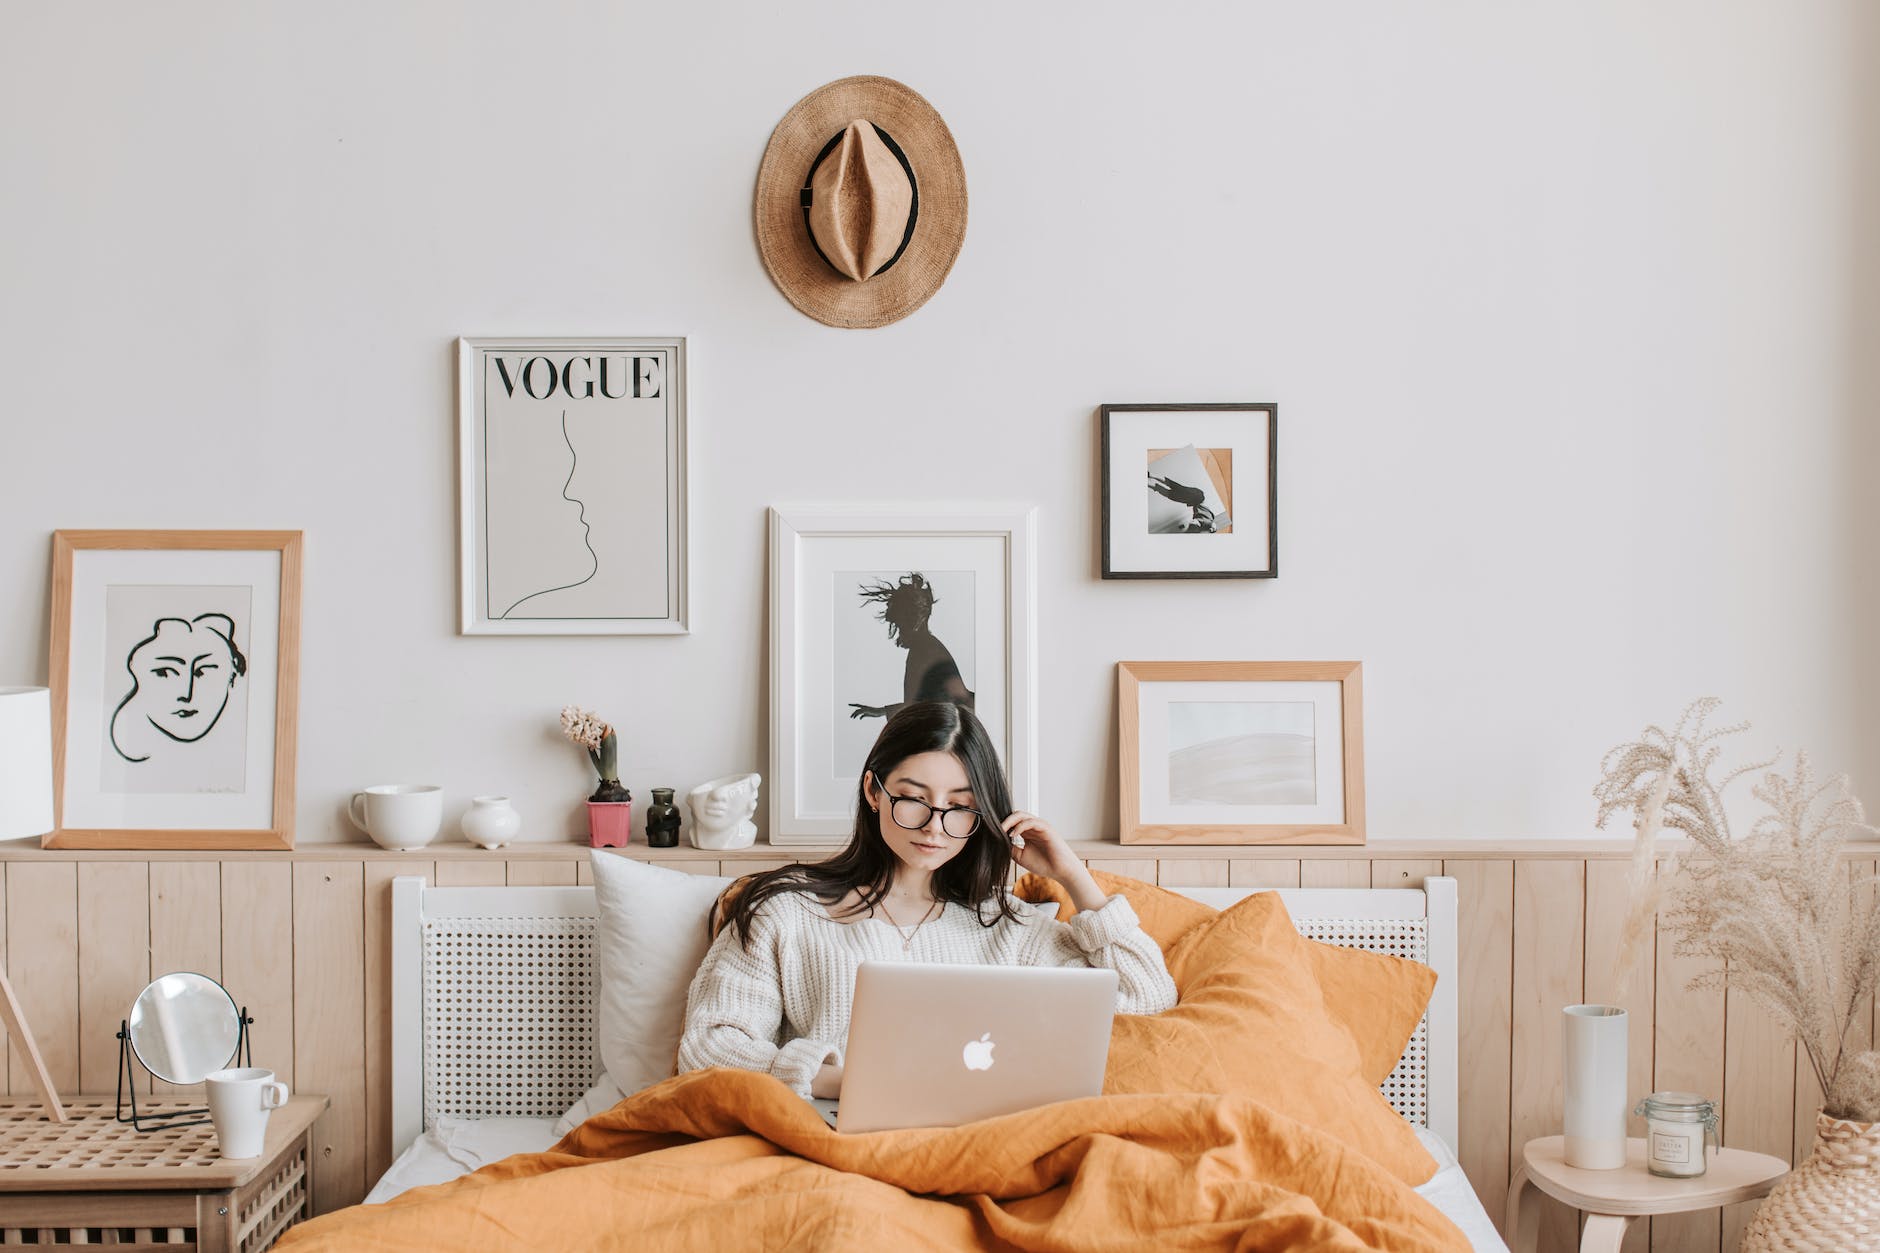 Tired of sluggish internet speeds? Fear not! This humorous guide reveals the top 10 hilarious ways to boost your house internet and surf like a pro. From WiFi wizardry to banishing bandwidth bandits, prepare to laugh your way to a faster connection!